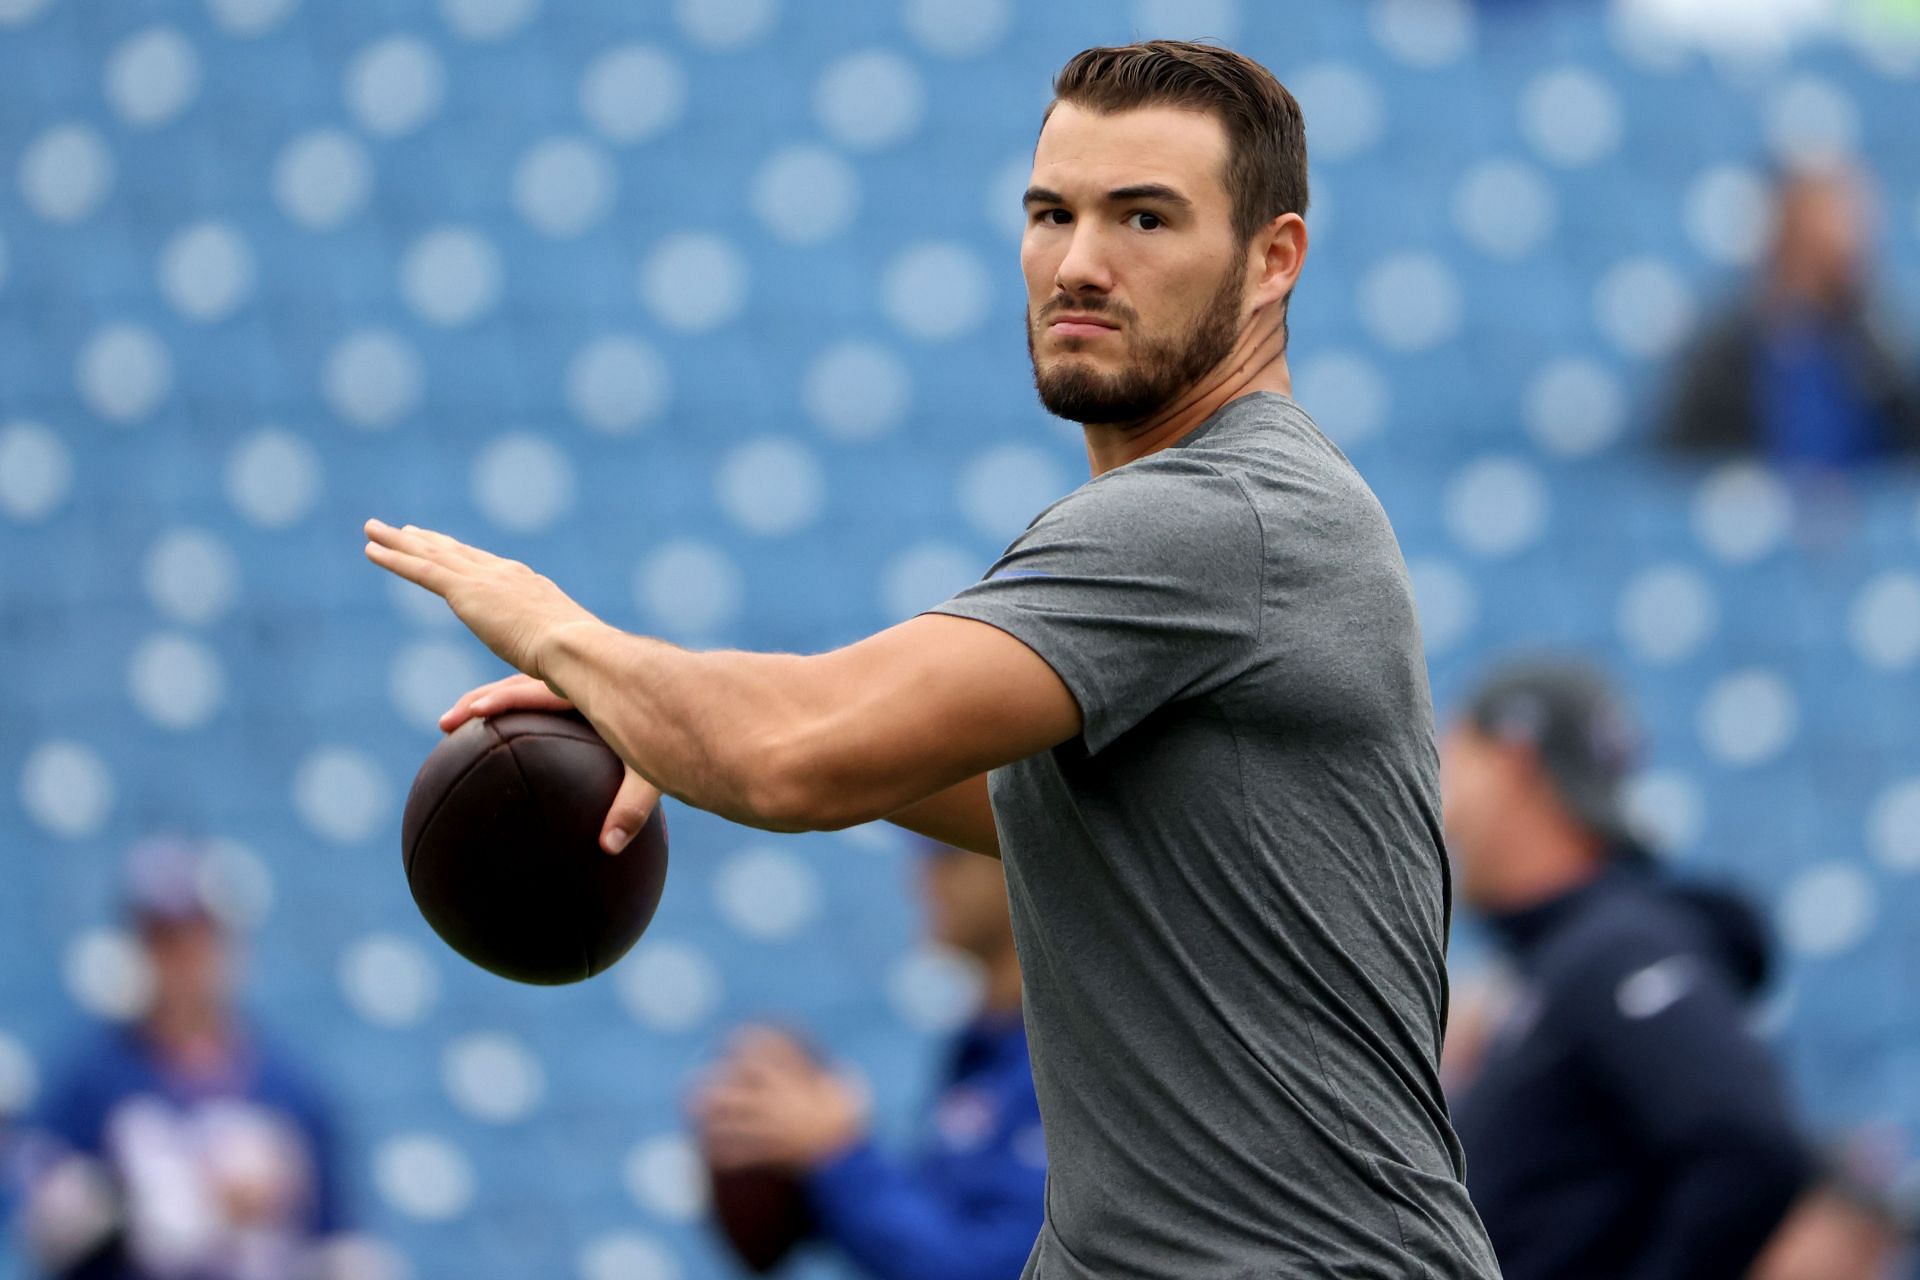 Mitchell Trubisky will want to prove a point in the upcoming NFL season.